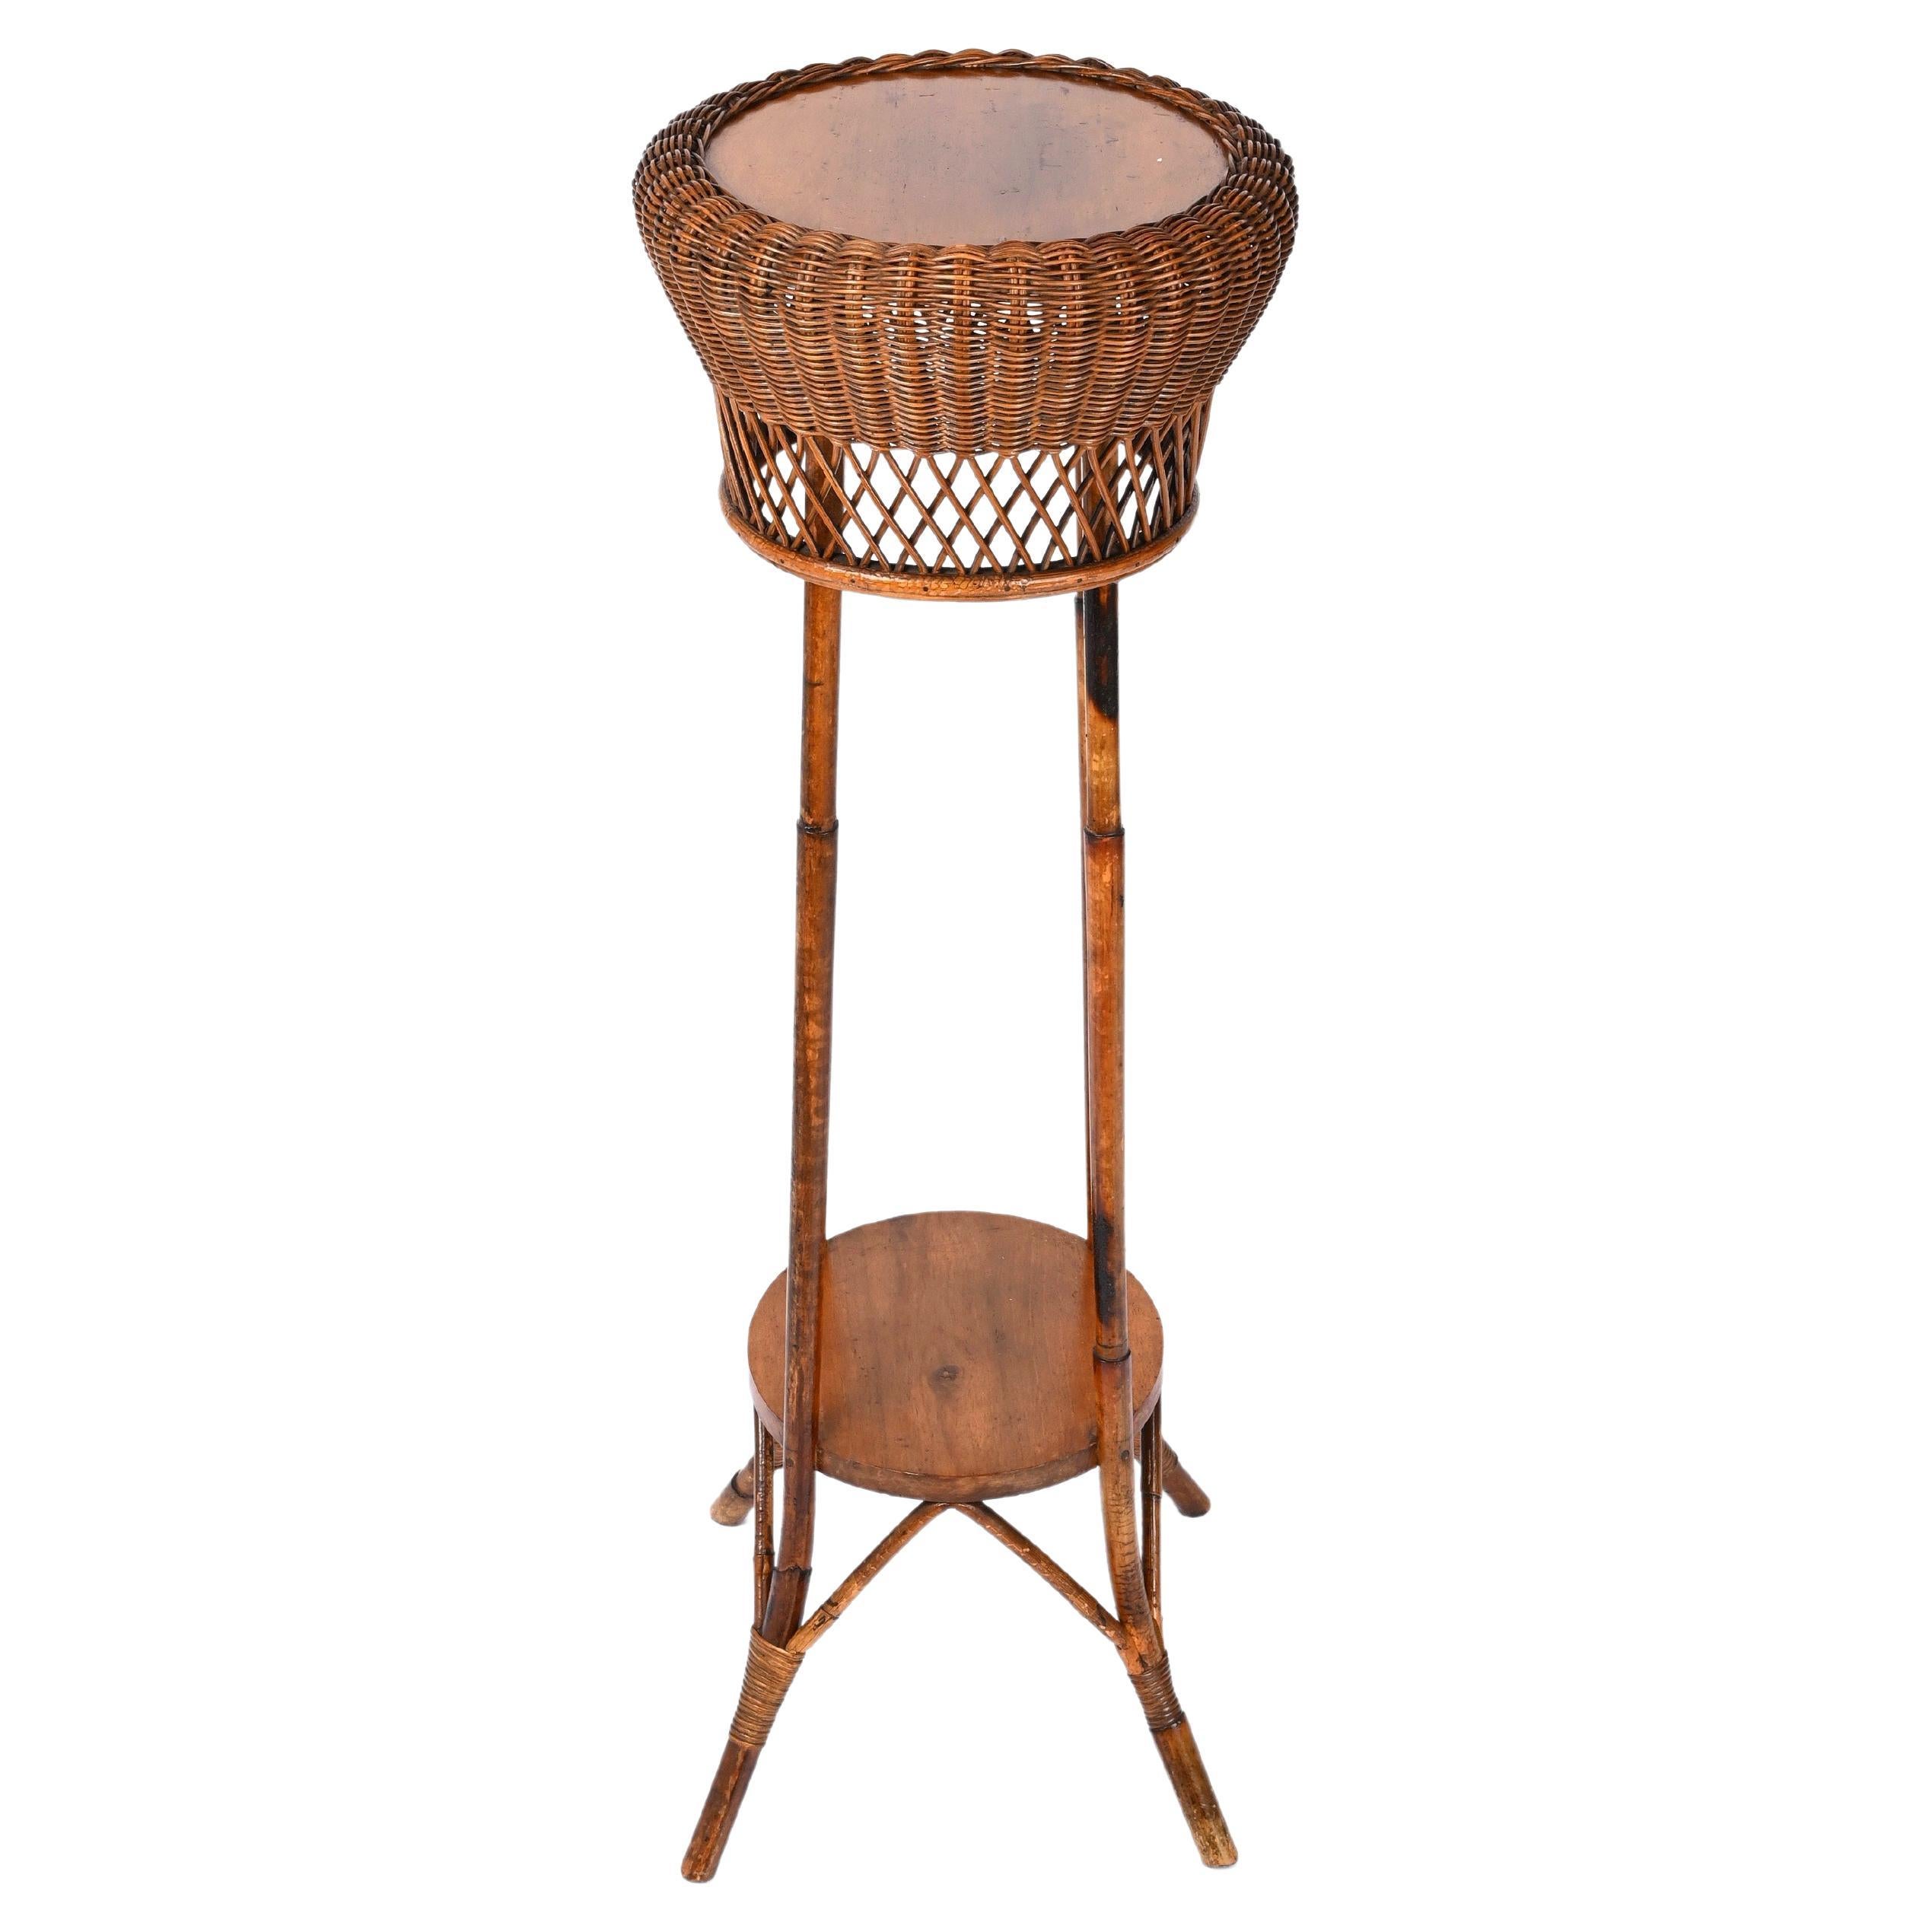 Midcentury Double-Levelled Circular Rattan and Bamboo Italian Pedestal, 1950s For Sale